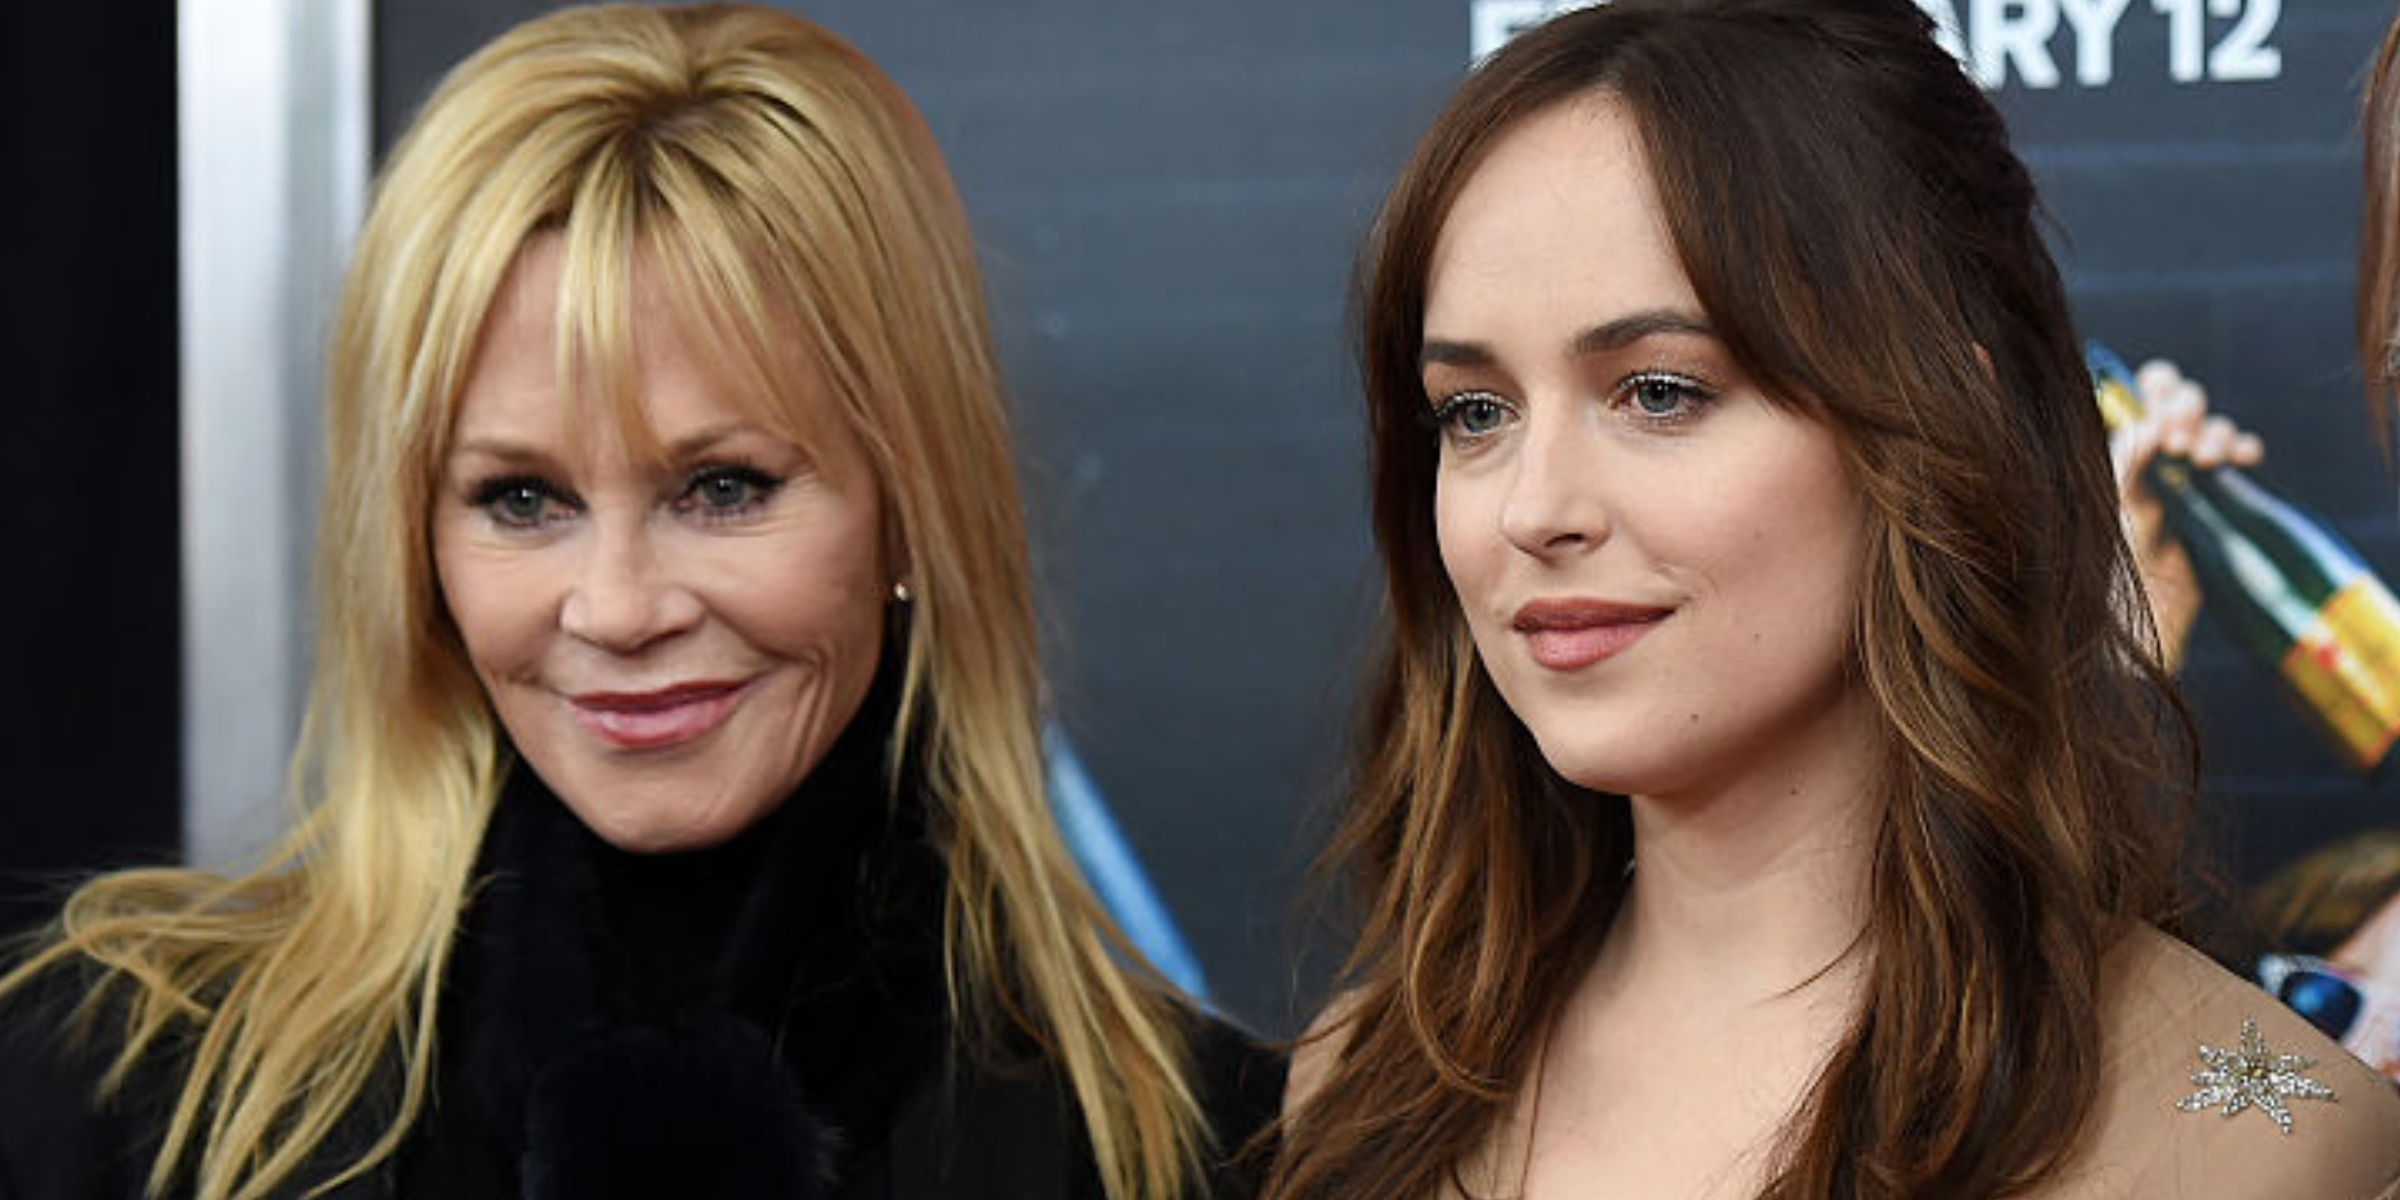 Melanie Griffith and Dakota Johnson | Source: Getty Images